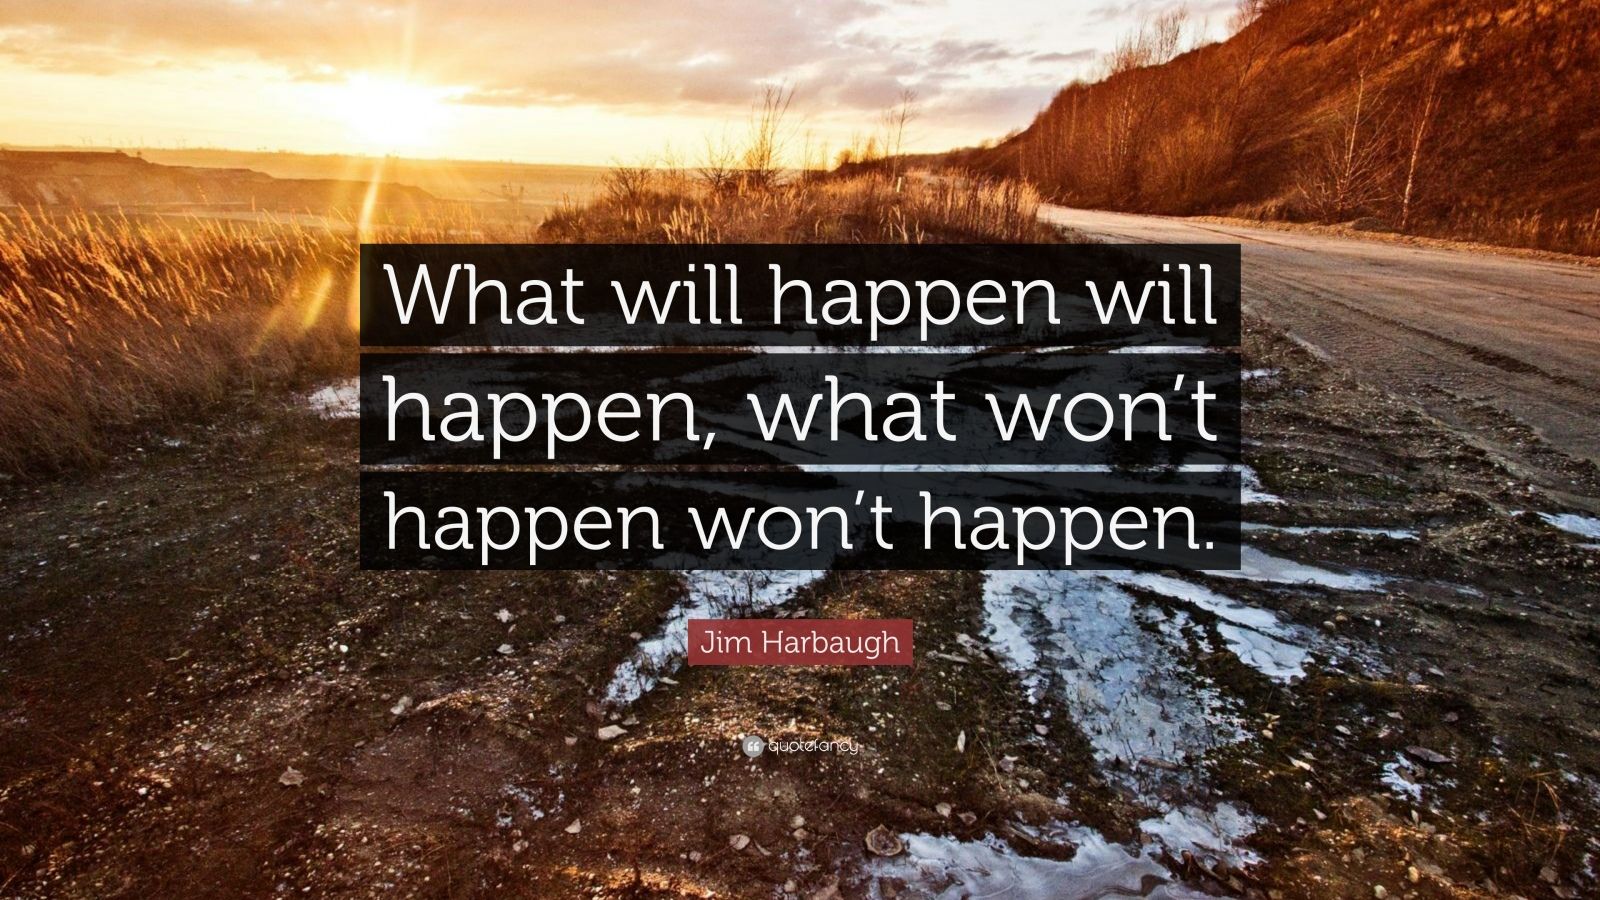 Jim Harbaugh Quote: “What will happen will happen, what won’t happen ...